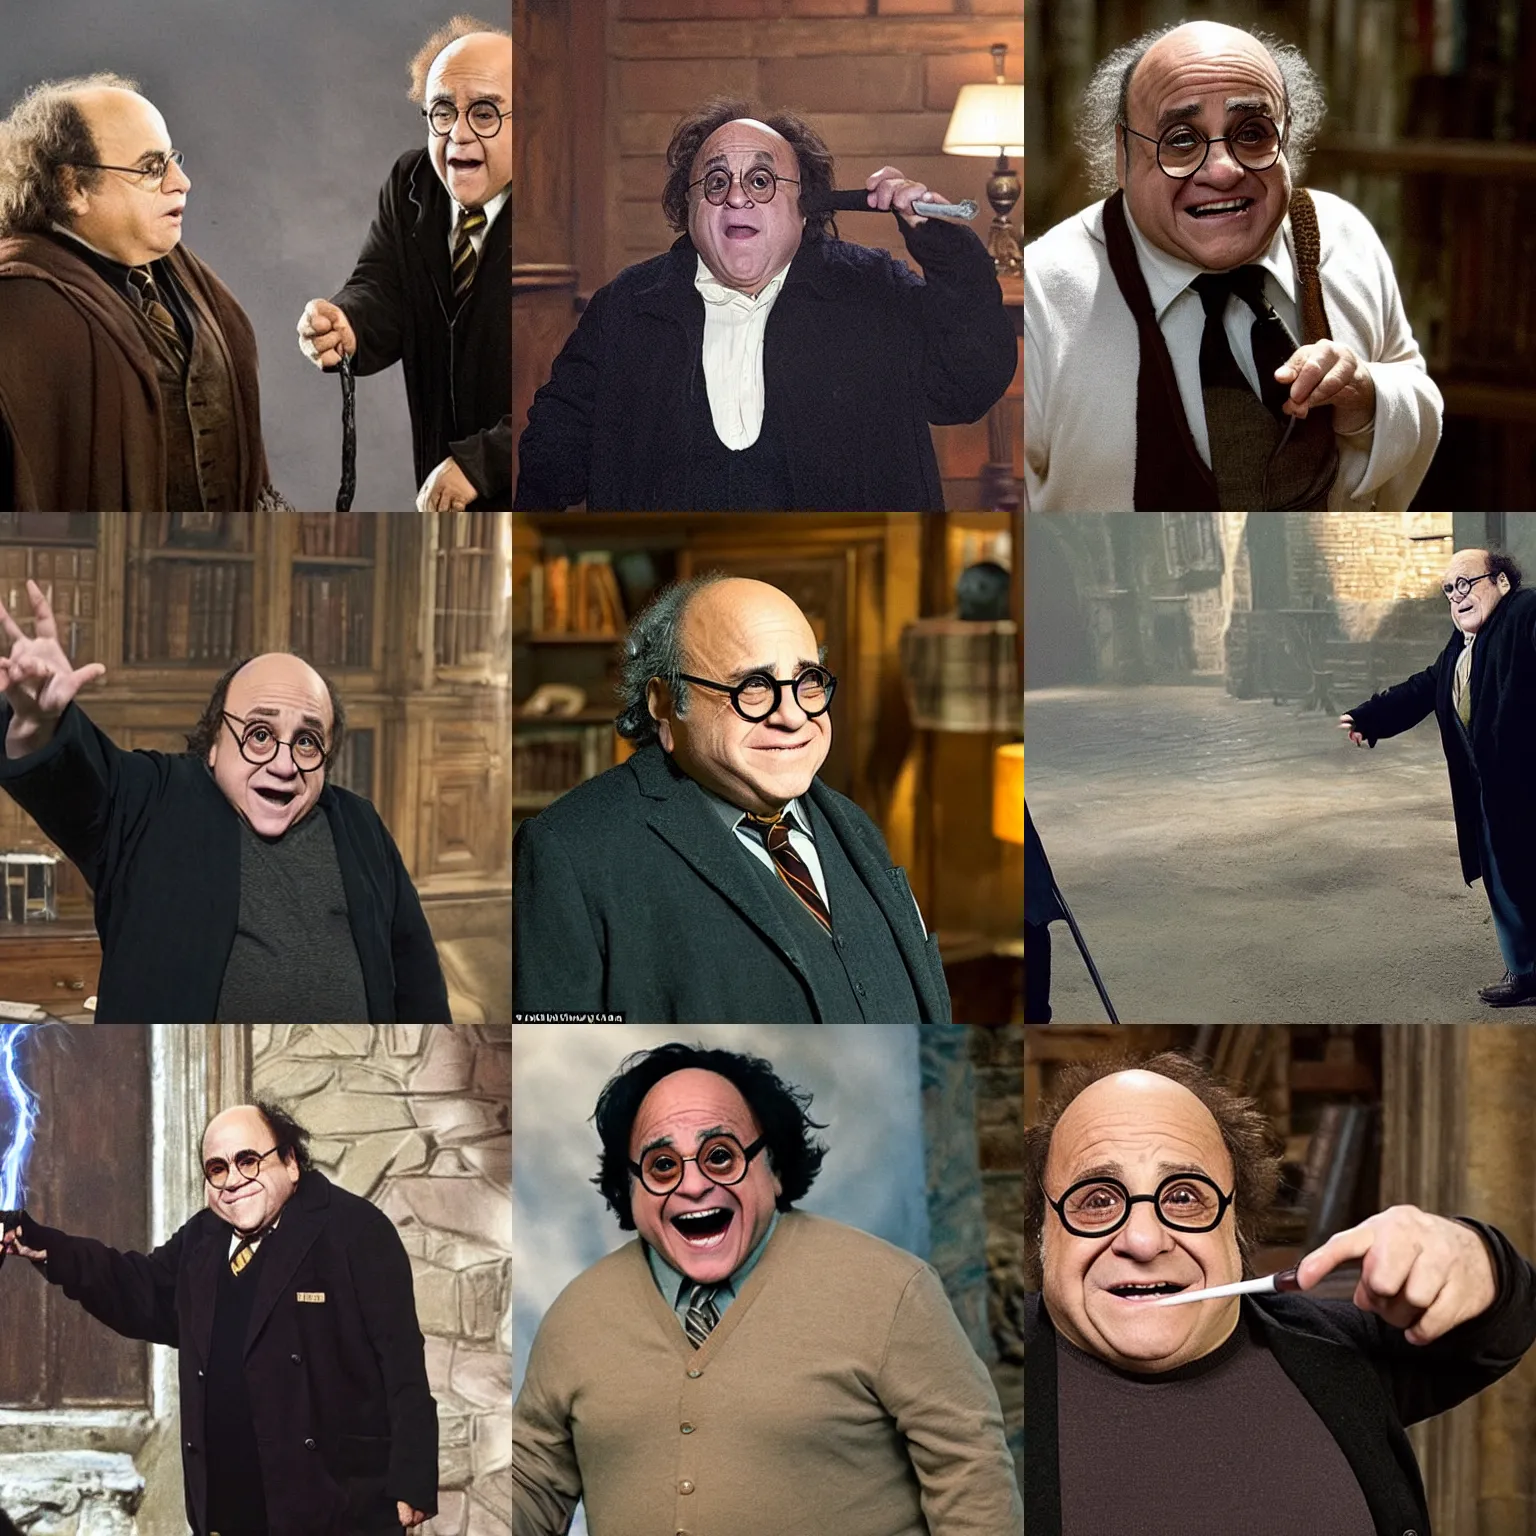 Prompt: danny devito as harry potter in new tv series! here he is casting patronus lmao